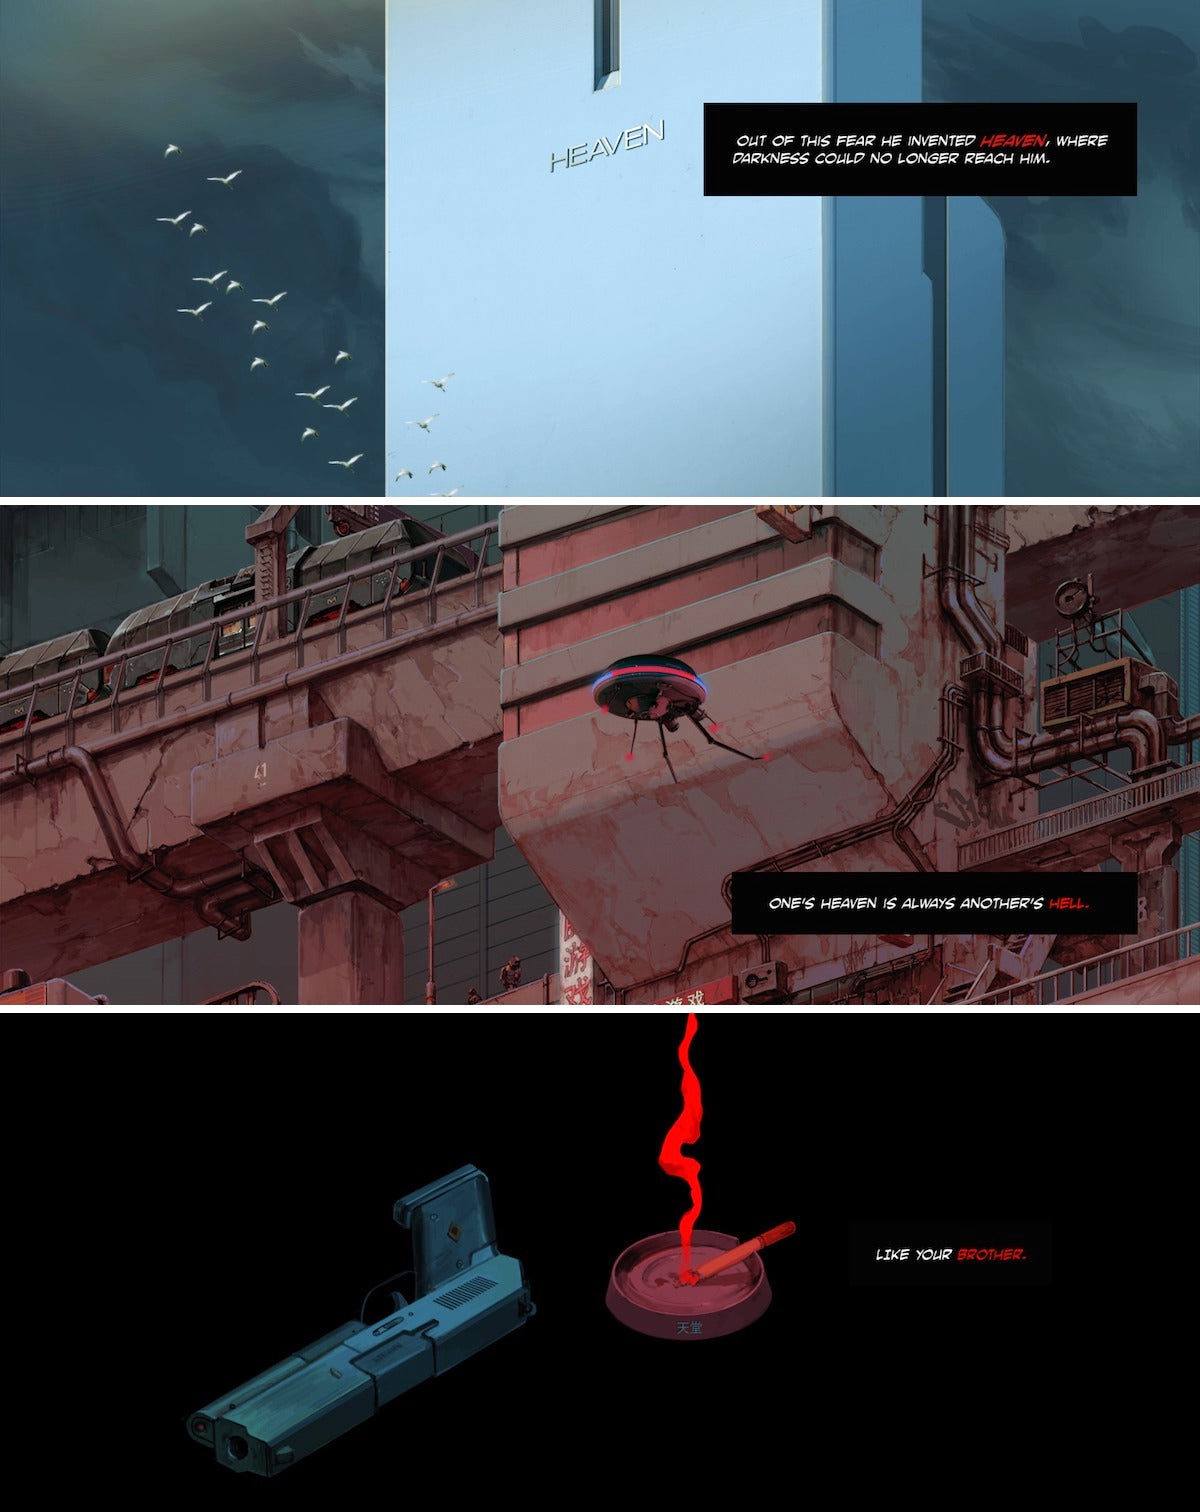 A few glimpses of the scrollable motion comic at Ruinergame.com